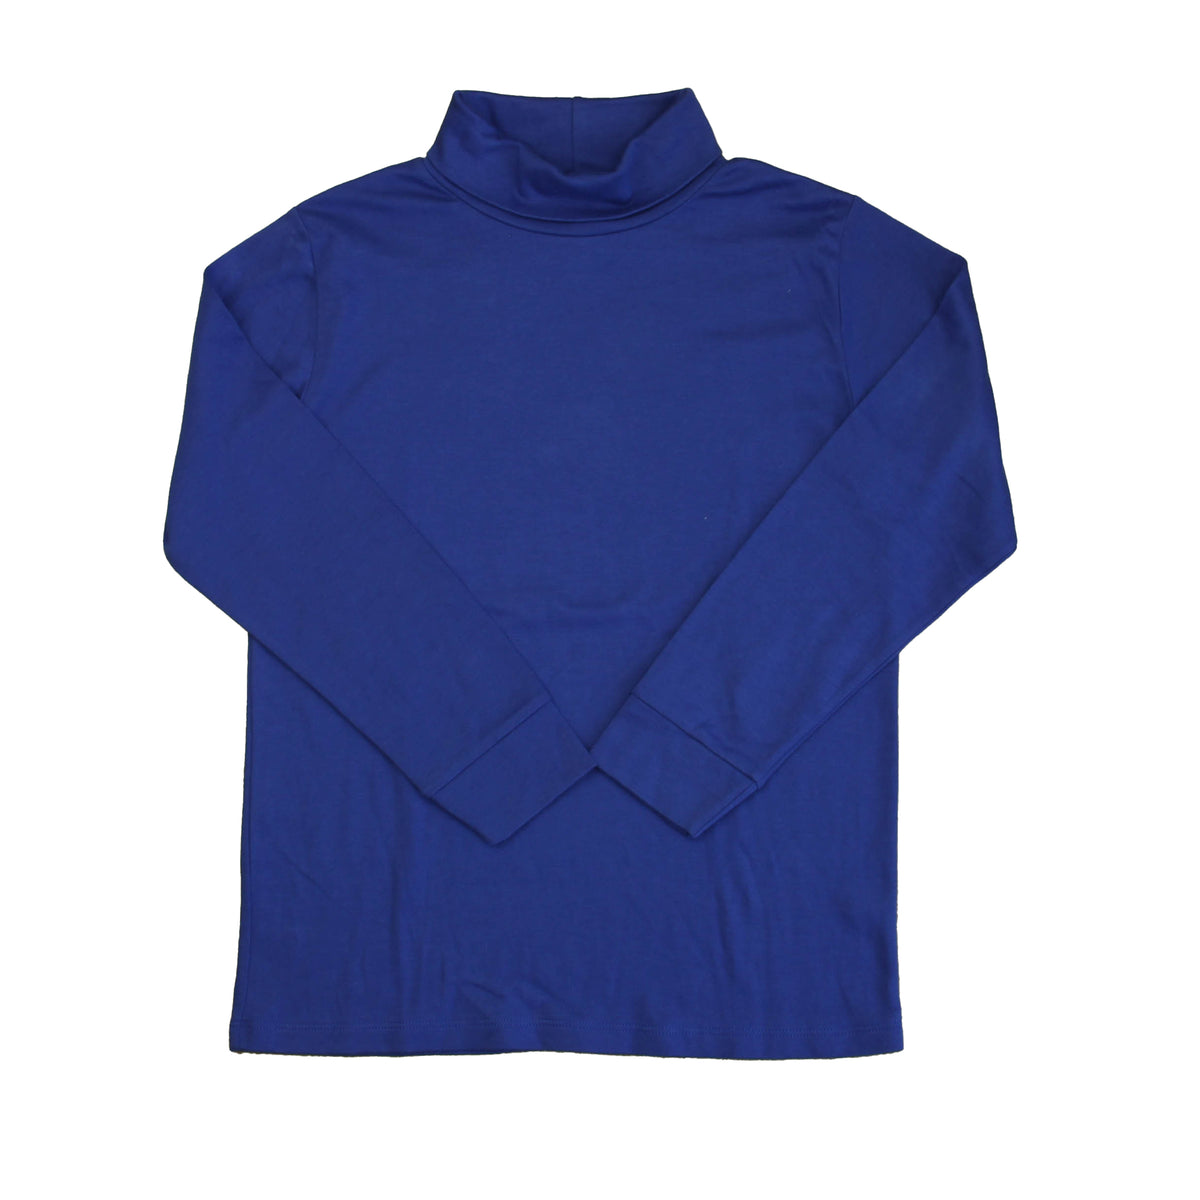 New with Tags: Bright Navy Top size: 6-14 Years -- FINAL SALE